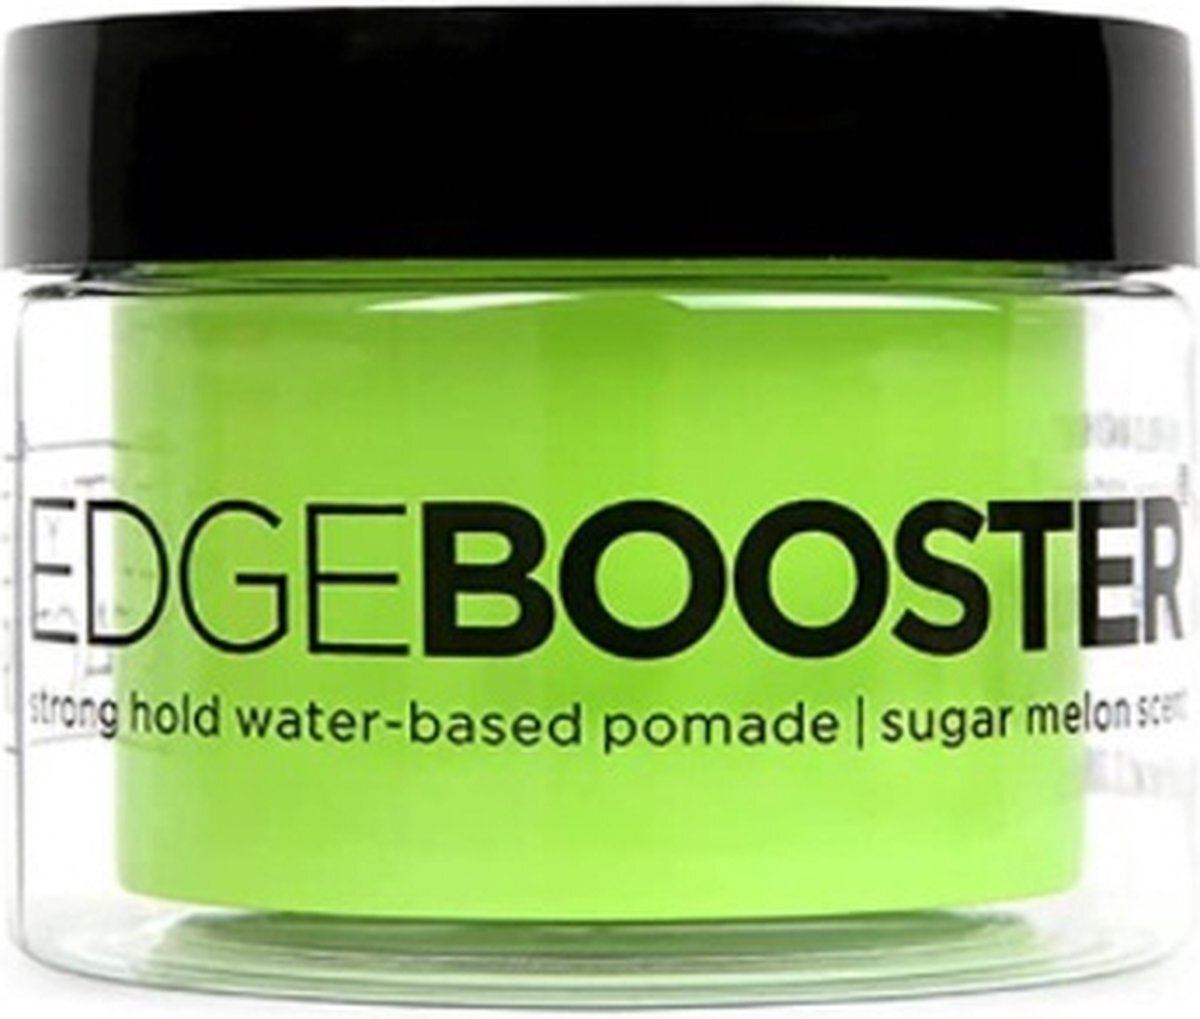 Style Factory Style Factor Edge Booster Pomade Sugar Melon